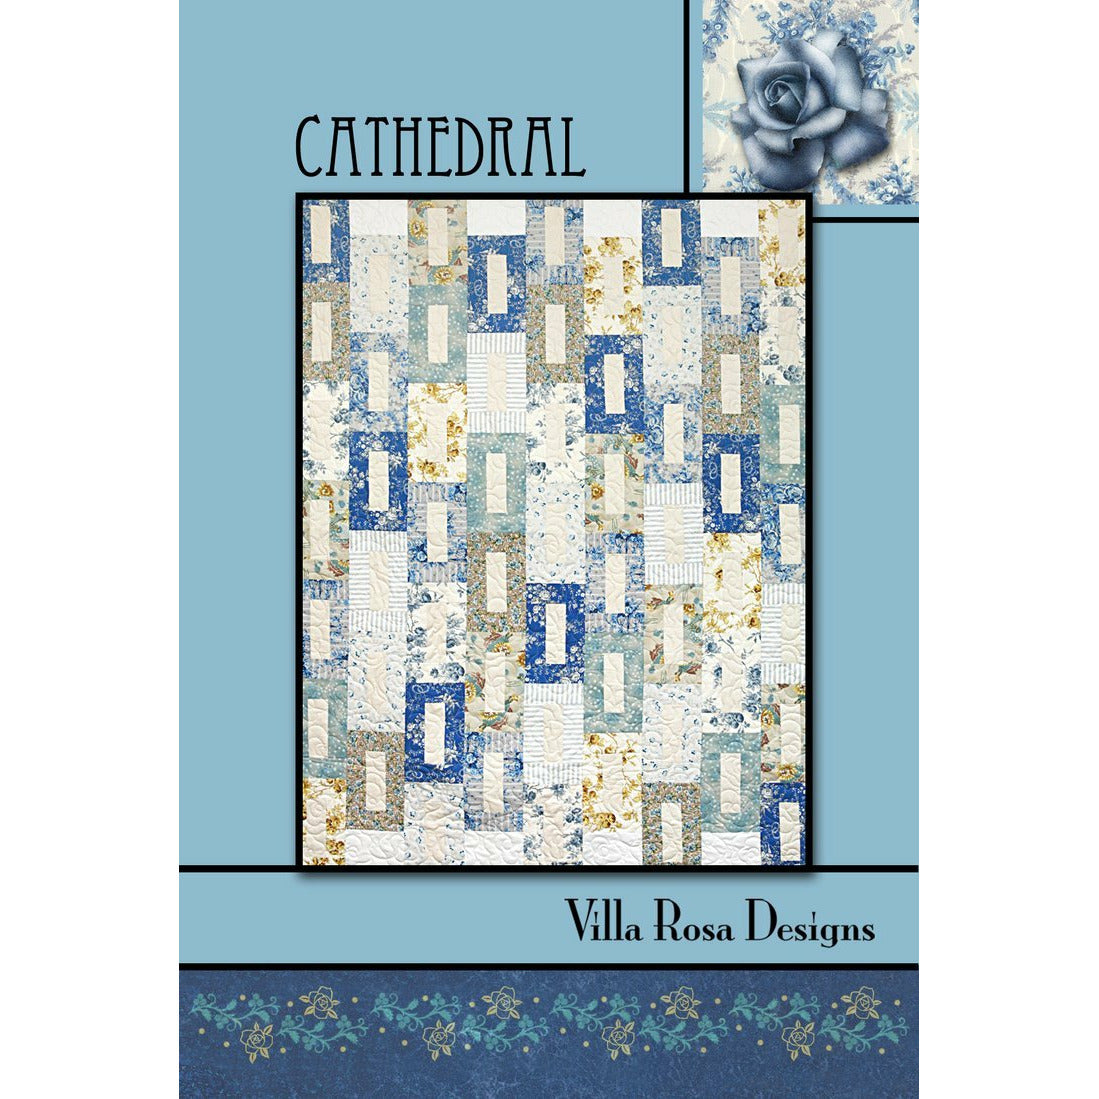 The Cathedral Quilt Pattern designed by Pat Fryer will look terrific made out of Australian Aboriginal fabrics or Batiks!